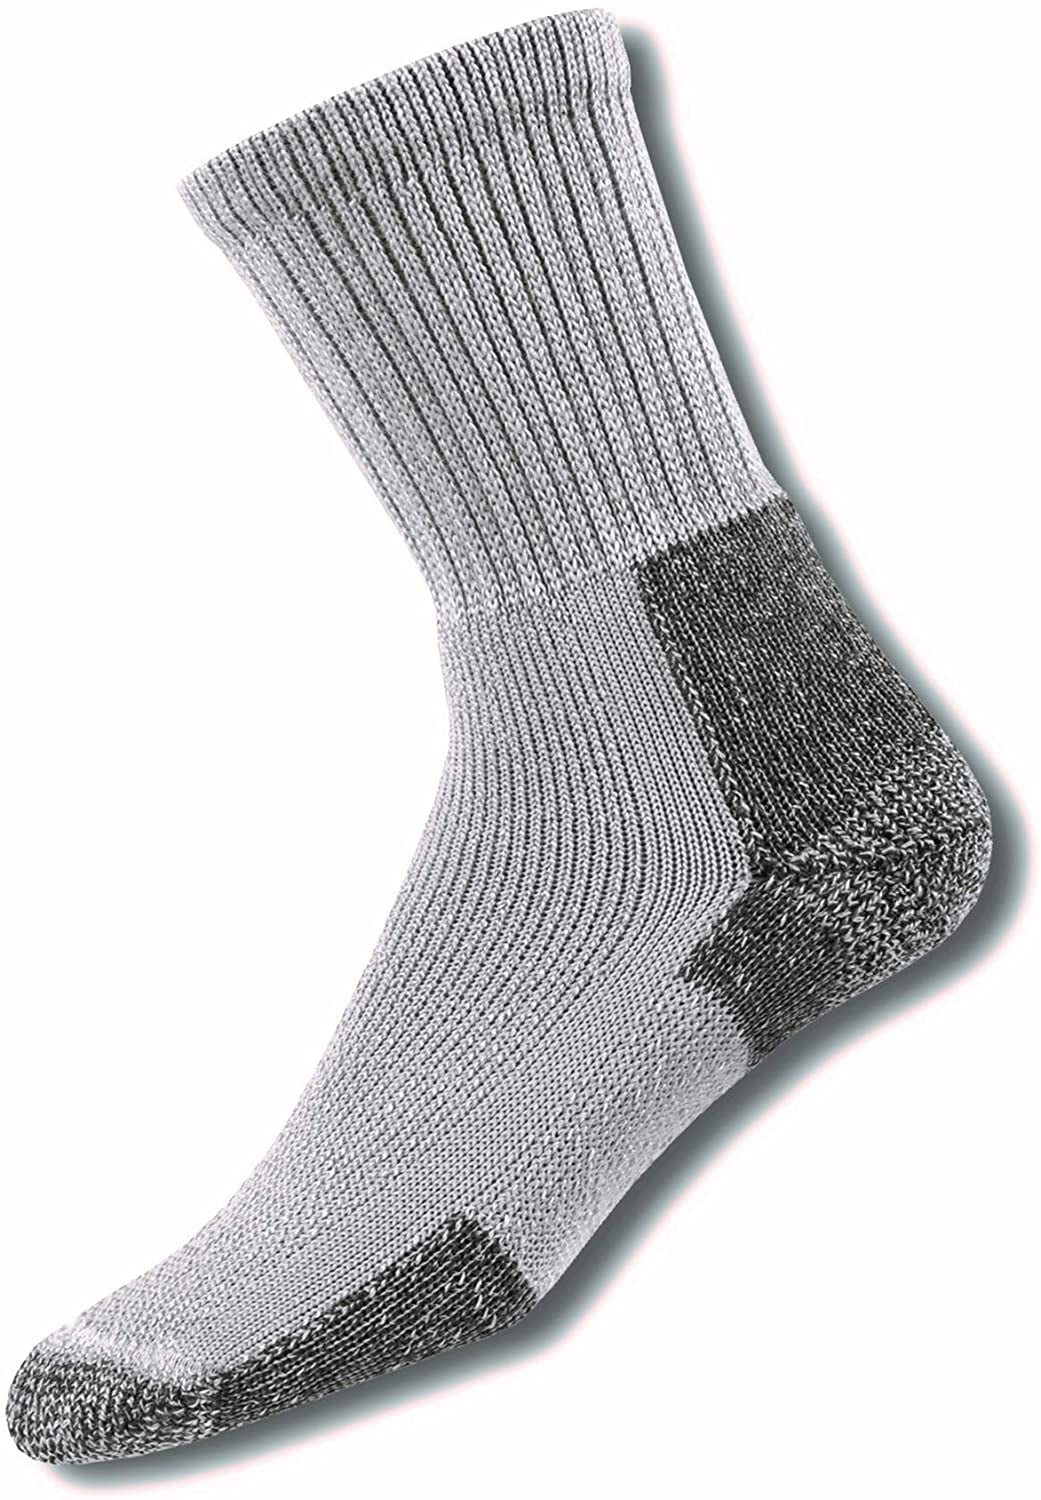 Details about   Realtree Dry Knit Thermal Heavyweight Socks 2-Pair Grey Size Medium 